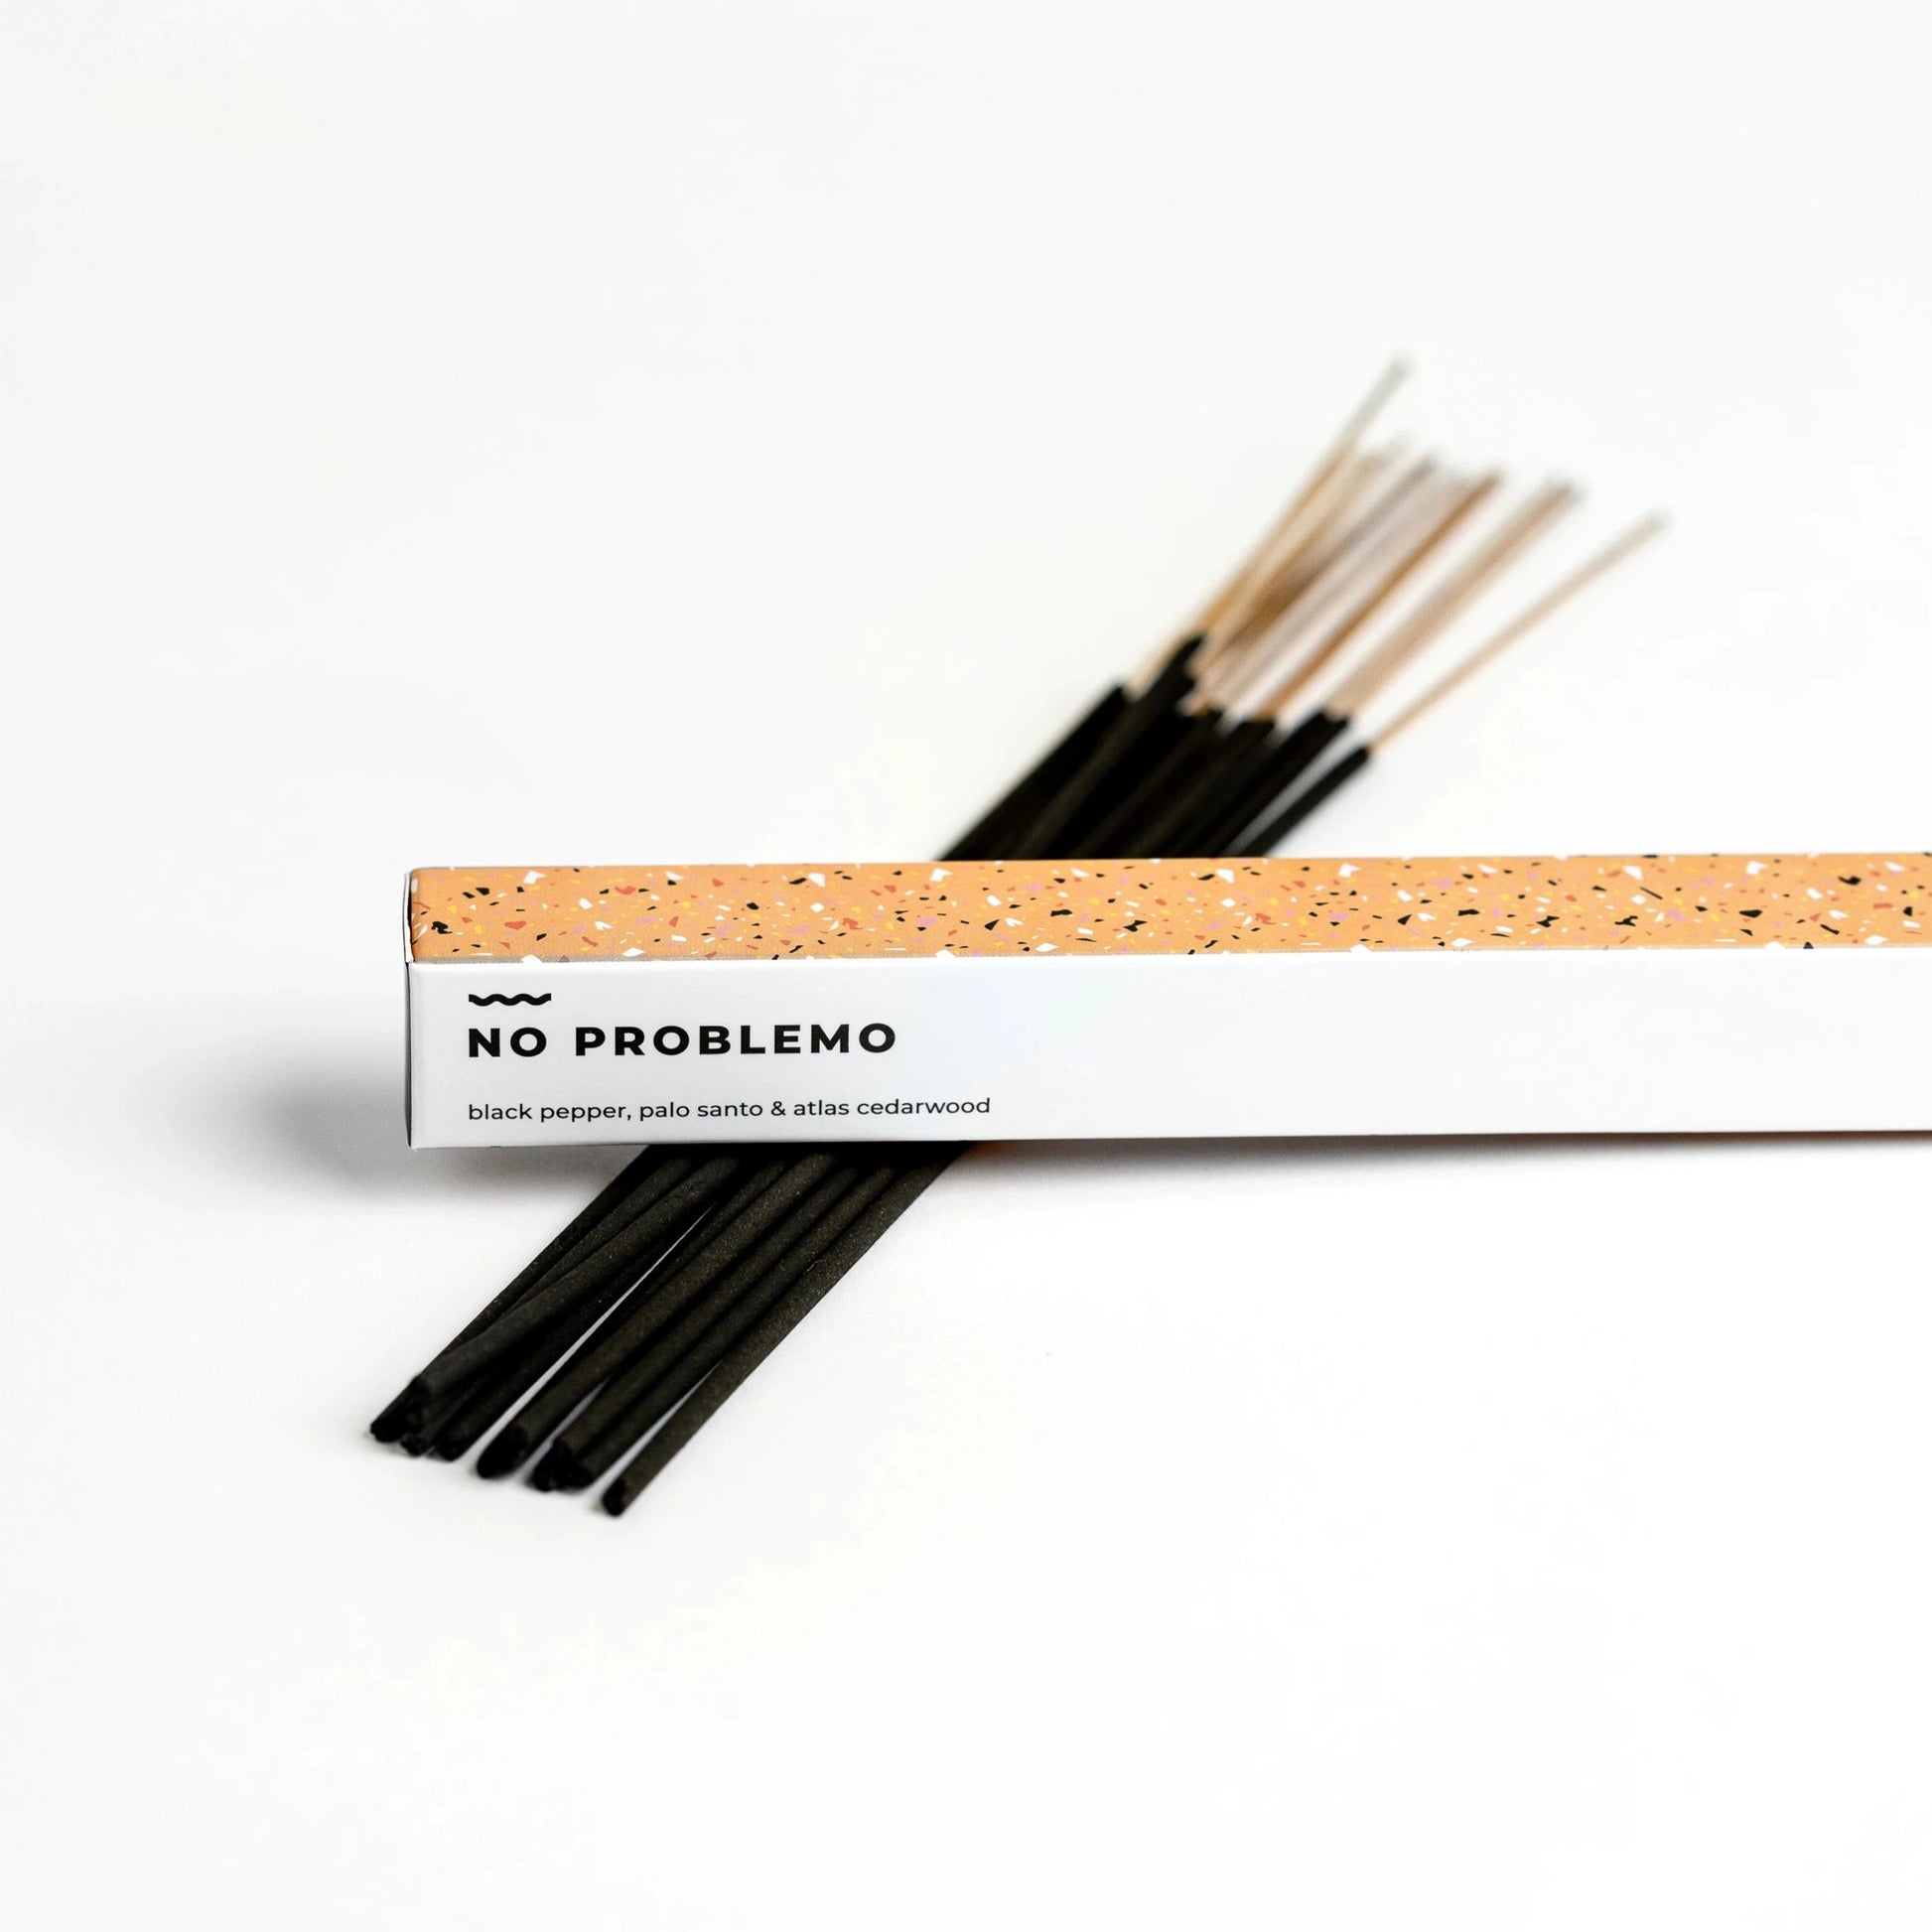 Charcoal incense sticks scented with therapeutic-grade essential oils.   Notes of: Black Pepper, Palo Santo & Atlas Cedarwood